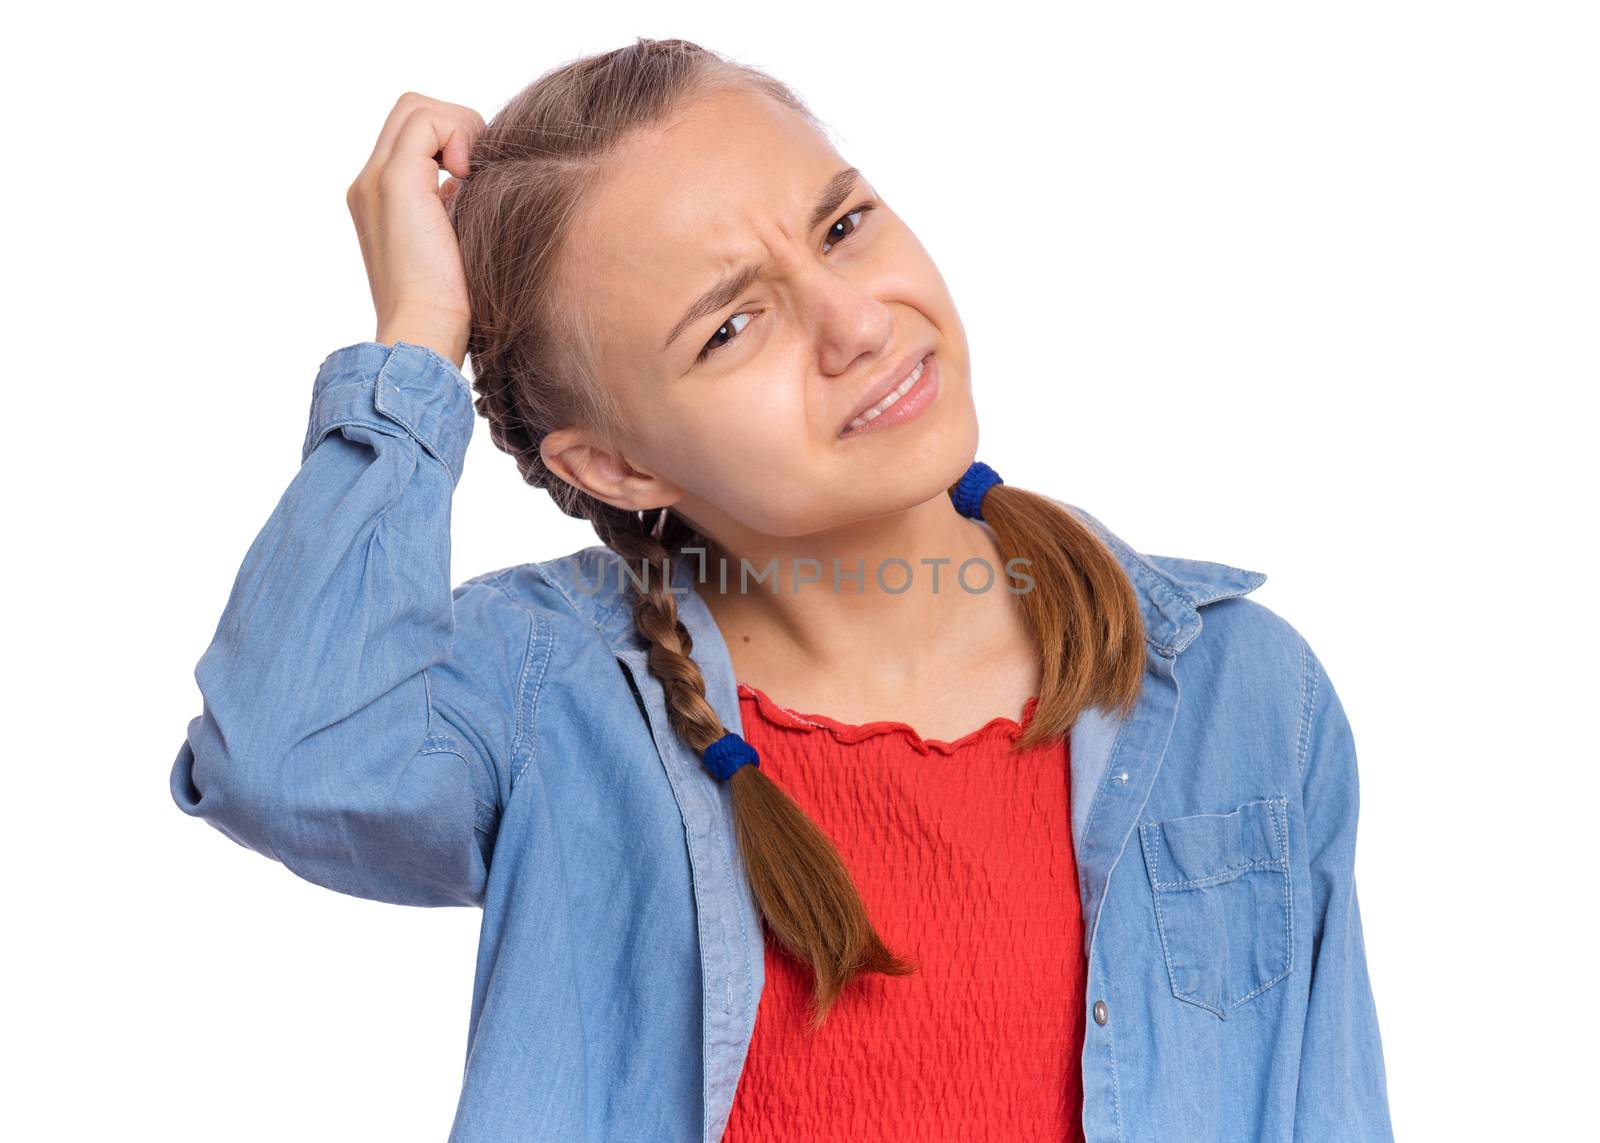 Emotional portrait of scared girl teenager looking with negative expression and disapproval, isolated on white background